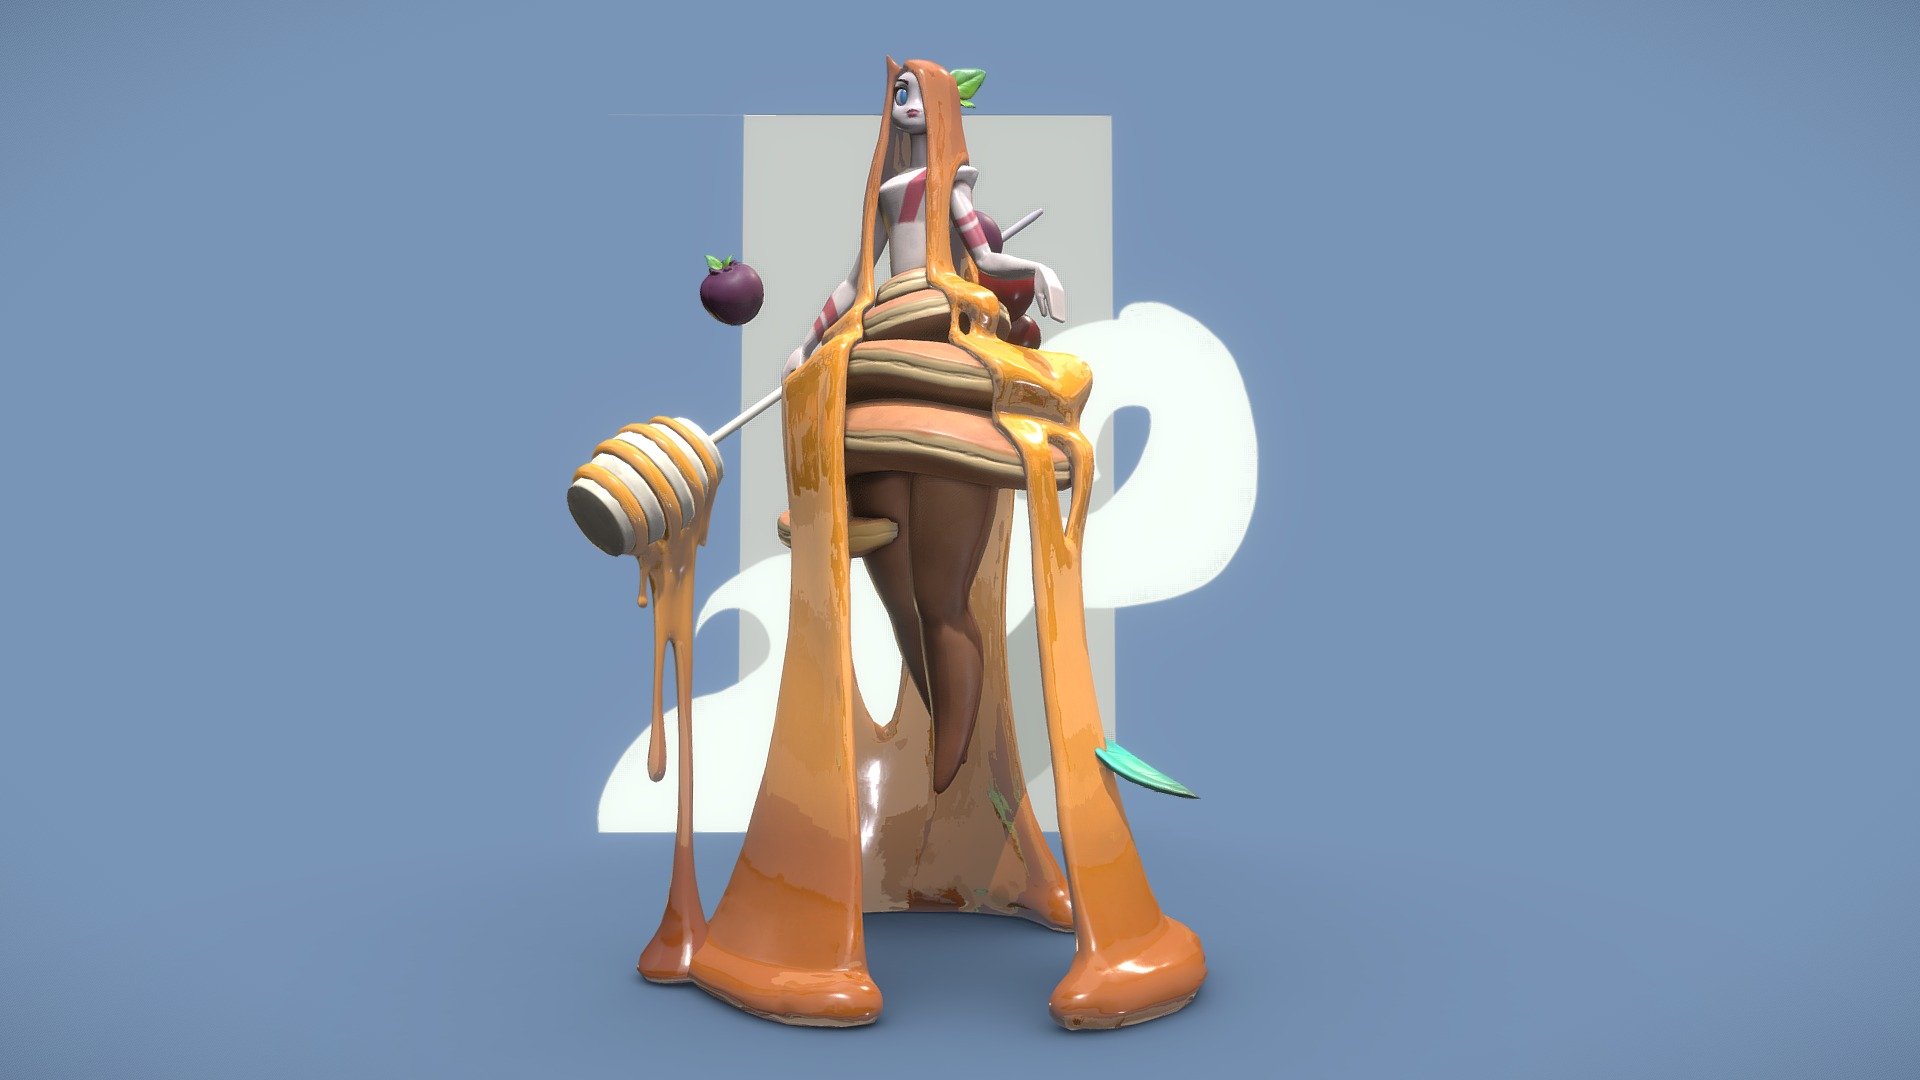 This is for my Stylized Creation course at DAE. 
The assignment was to create a stylized Character based on a concept we could chose ourself, but it needed to be approved by the teachers. 

The amazing origial concept is from chanin suasungnern https://www.artstation.com/artwork/1n1RXL

Sculpt - Zbrush
Retopo &amp; Unwrap - Maya
Texturing - Substance Painter &amp; a little bit Photoshop - Honey Berry Princess - Stylized Character - 3D model by Joan Tieu (@JoanTieu) 3d model